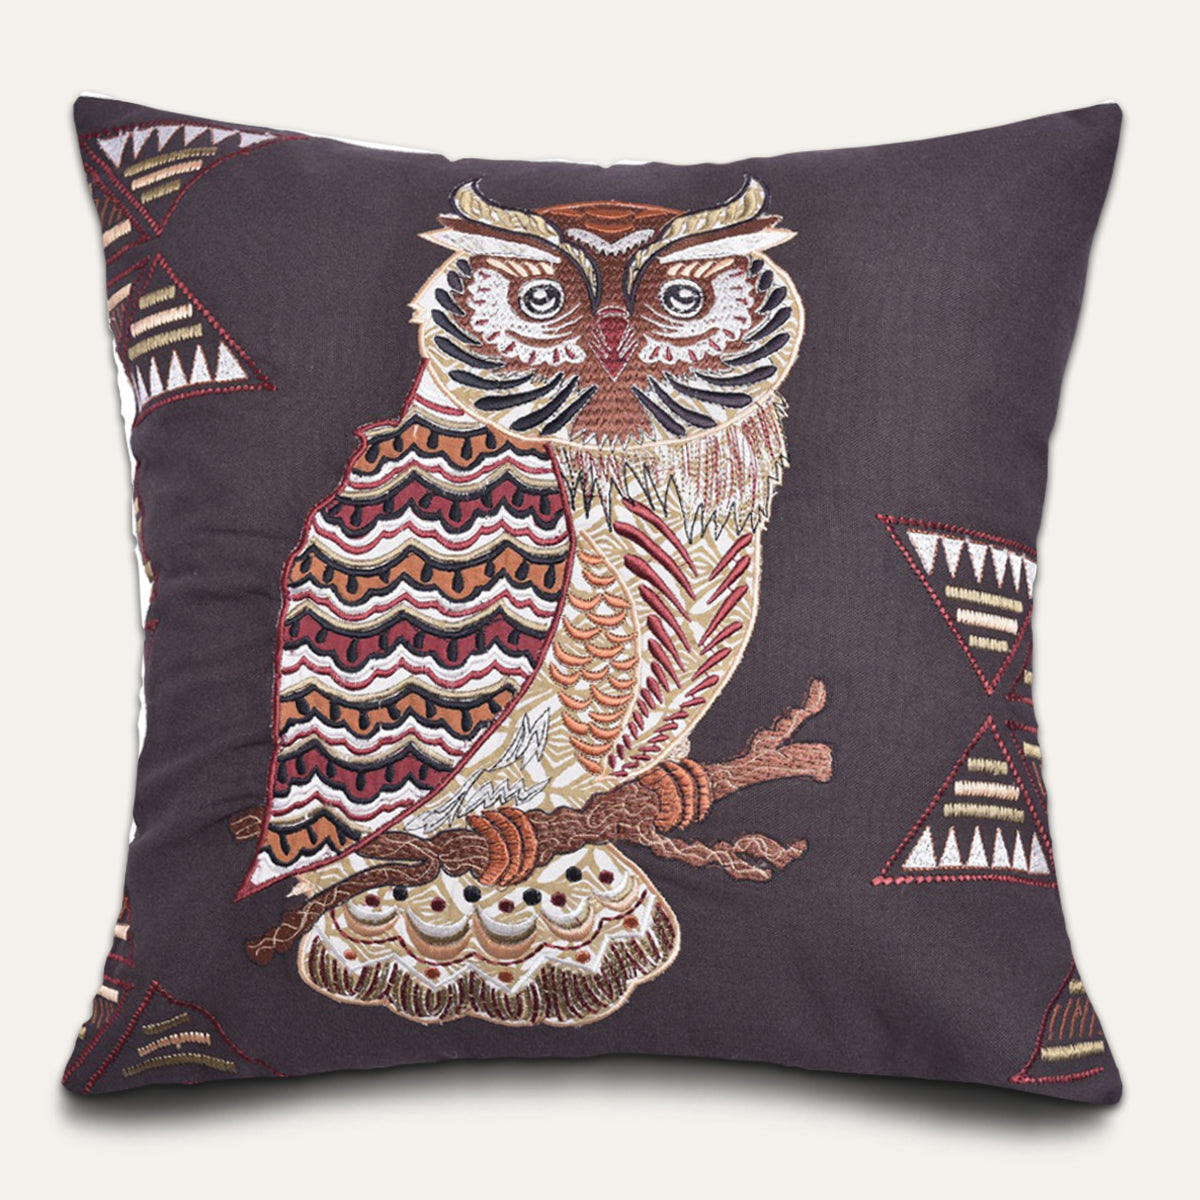 Owl Printed Design Throw Pillow Covers - Set of 2 and 4, 18 x 18 Inches - Decozen